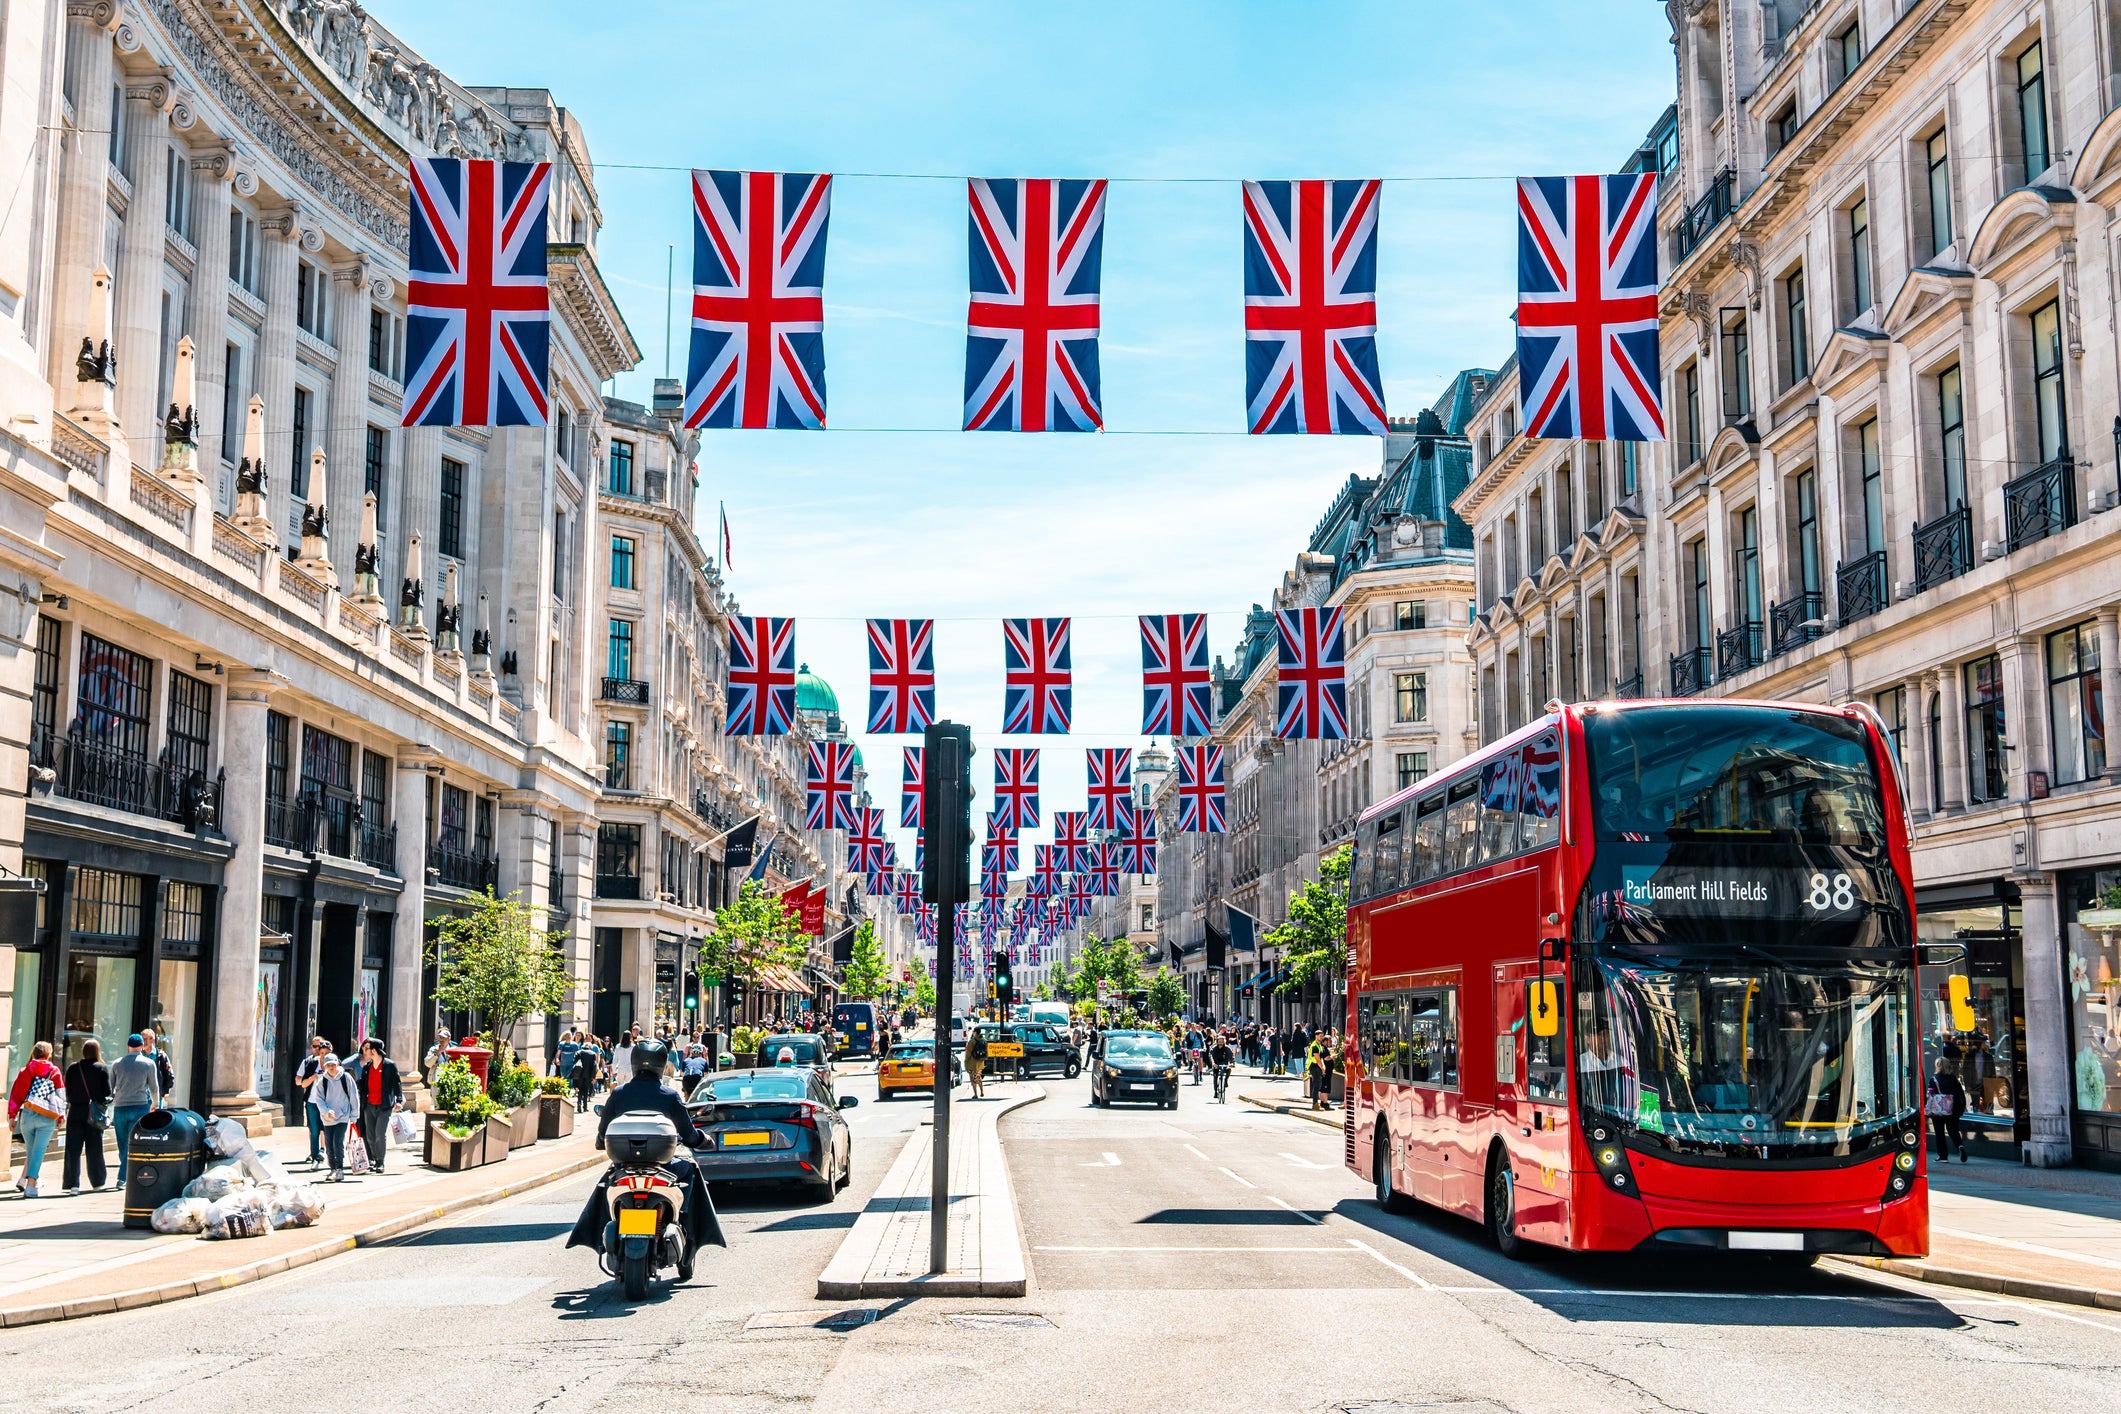 Department stores, boutiques and markets line the streets of the English capital